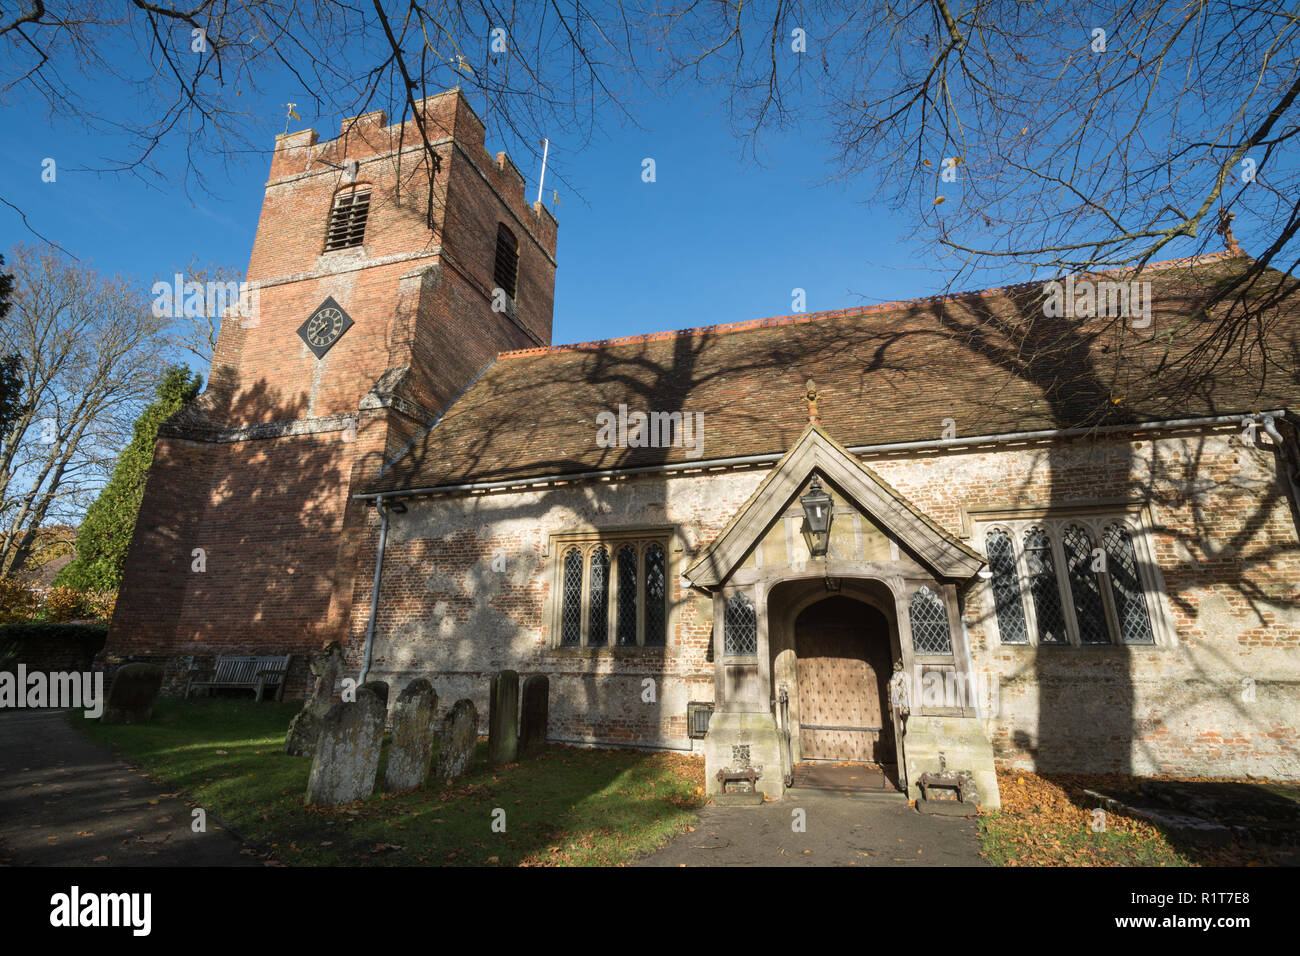 Rotherwick parish church, dating from the 13th century, on The Street in the small village of Rotherwick in Hampshire, UK Stock Photo